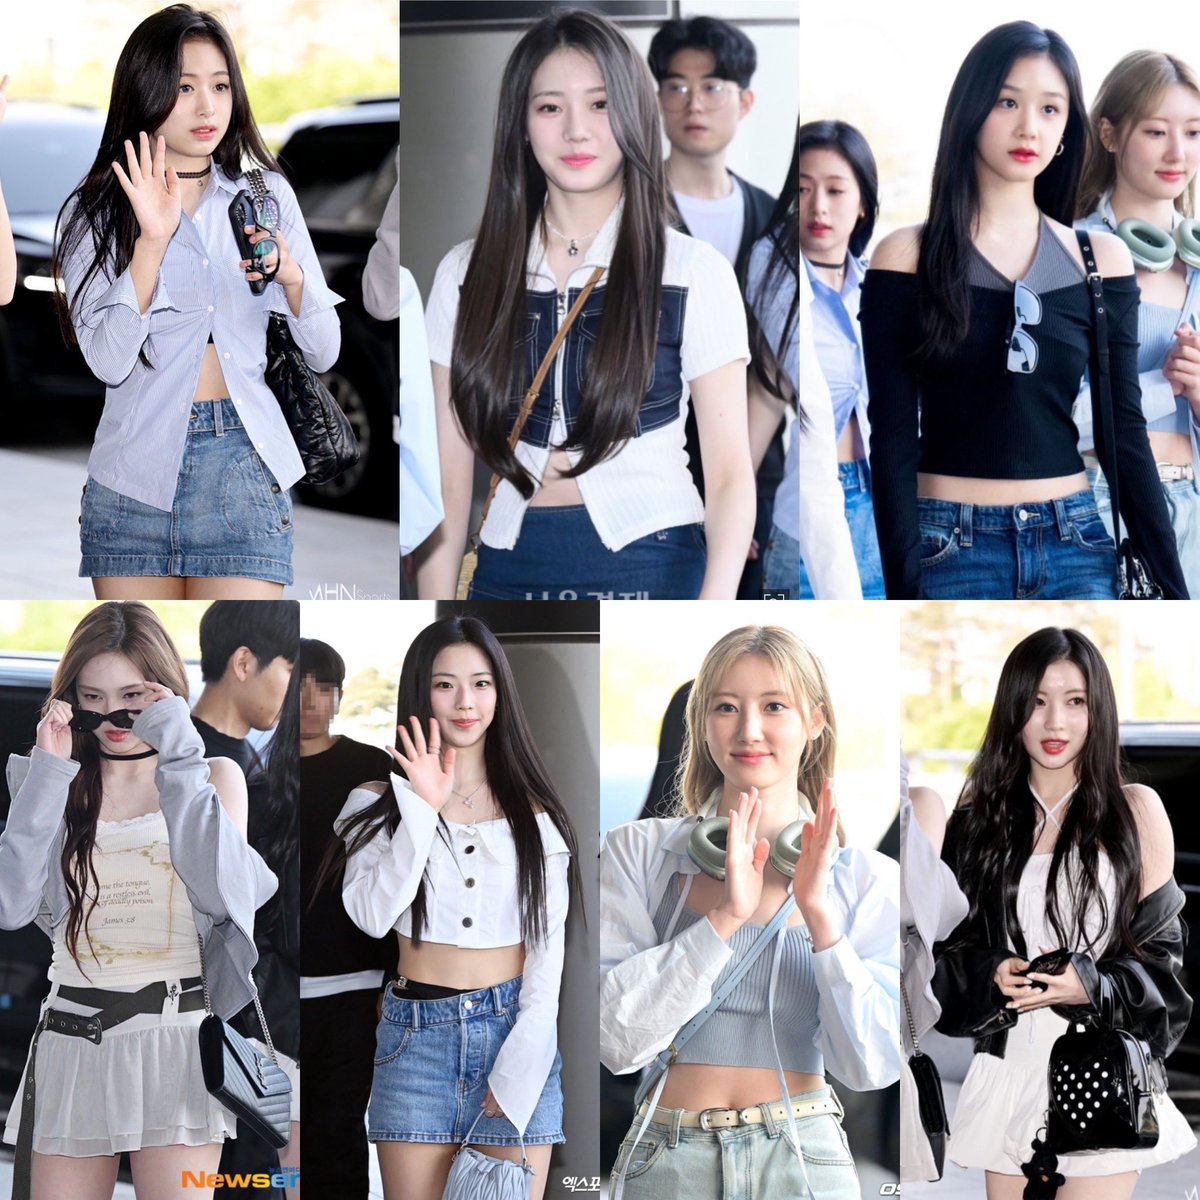 #BABYMONSTER at the airport today! have a safe flight girls!